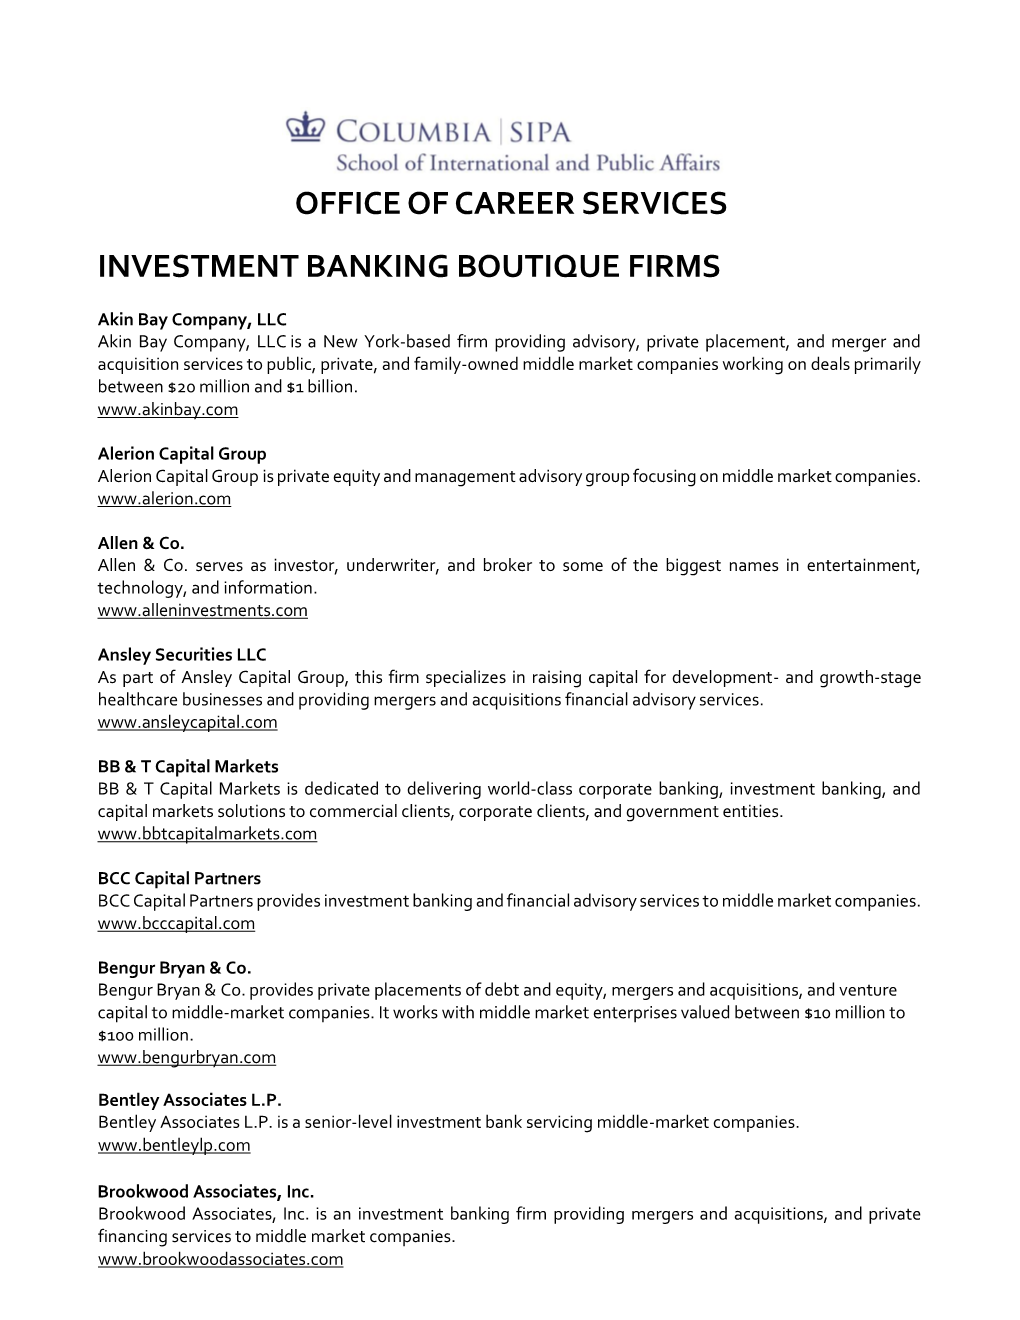 Office of Career Services Investment Banking Boutique Firms